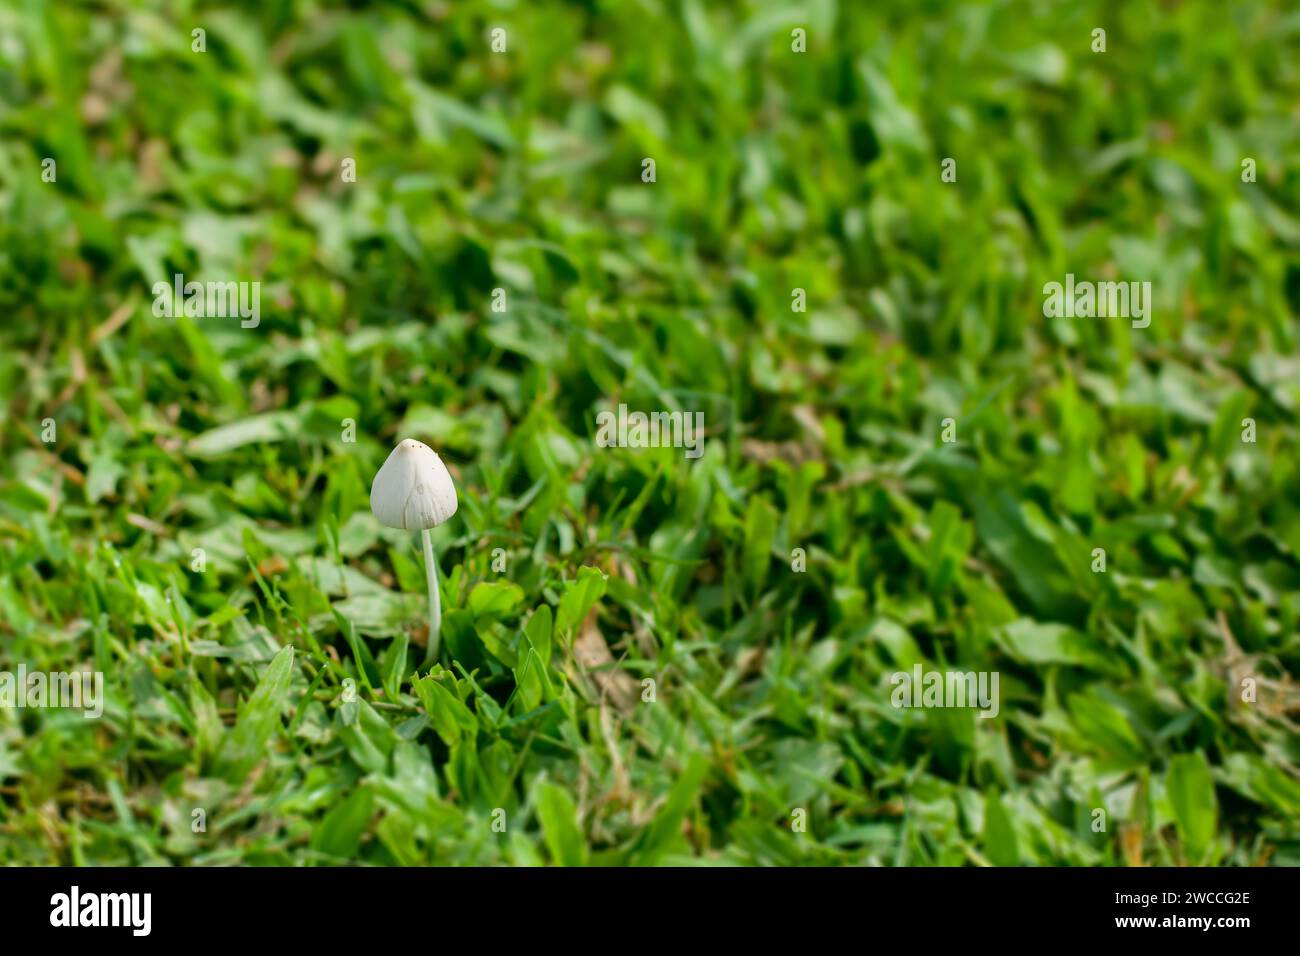 A delicate mushroom appears amidst a field of dense green grass, highlighting the beauty of natural flora in daylight Stock Photo